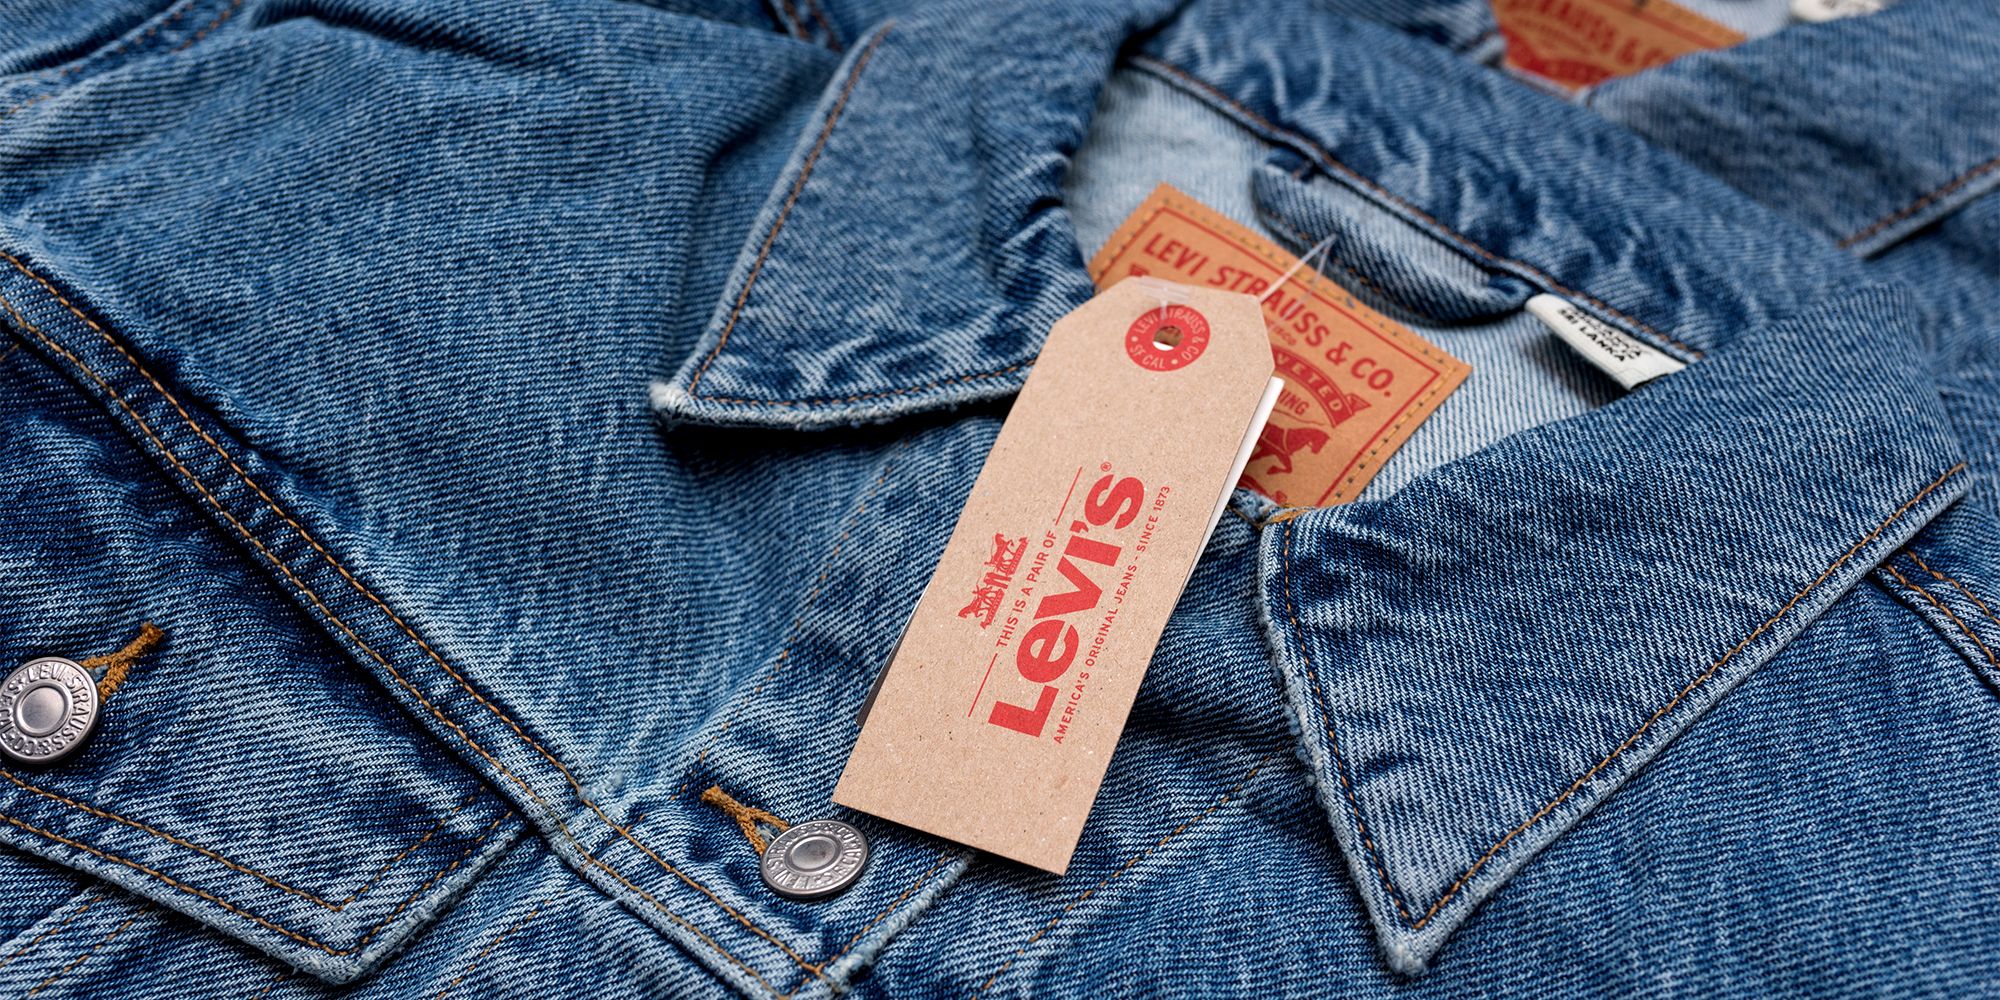 Levi's Fights for Gun Control With Safer Tomorrow Fund and Everytown for Gun  Safety Partnership